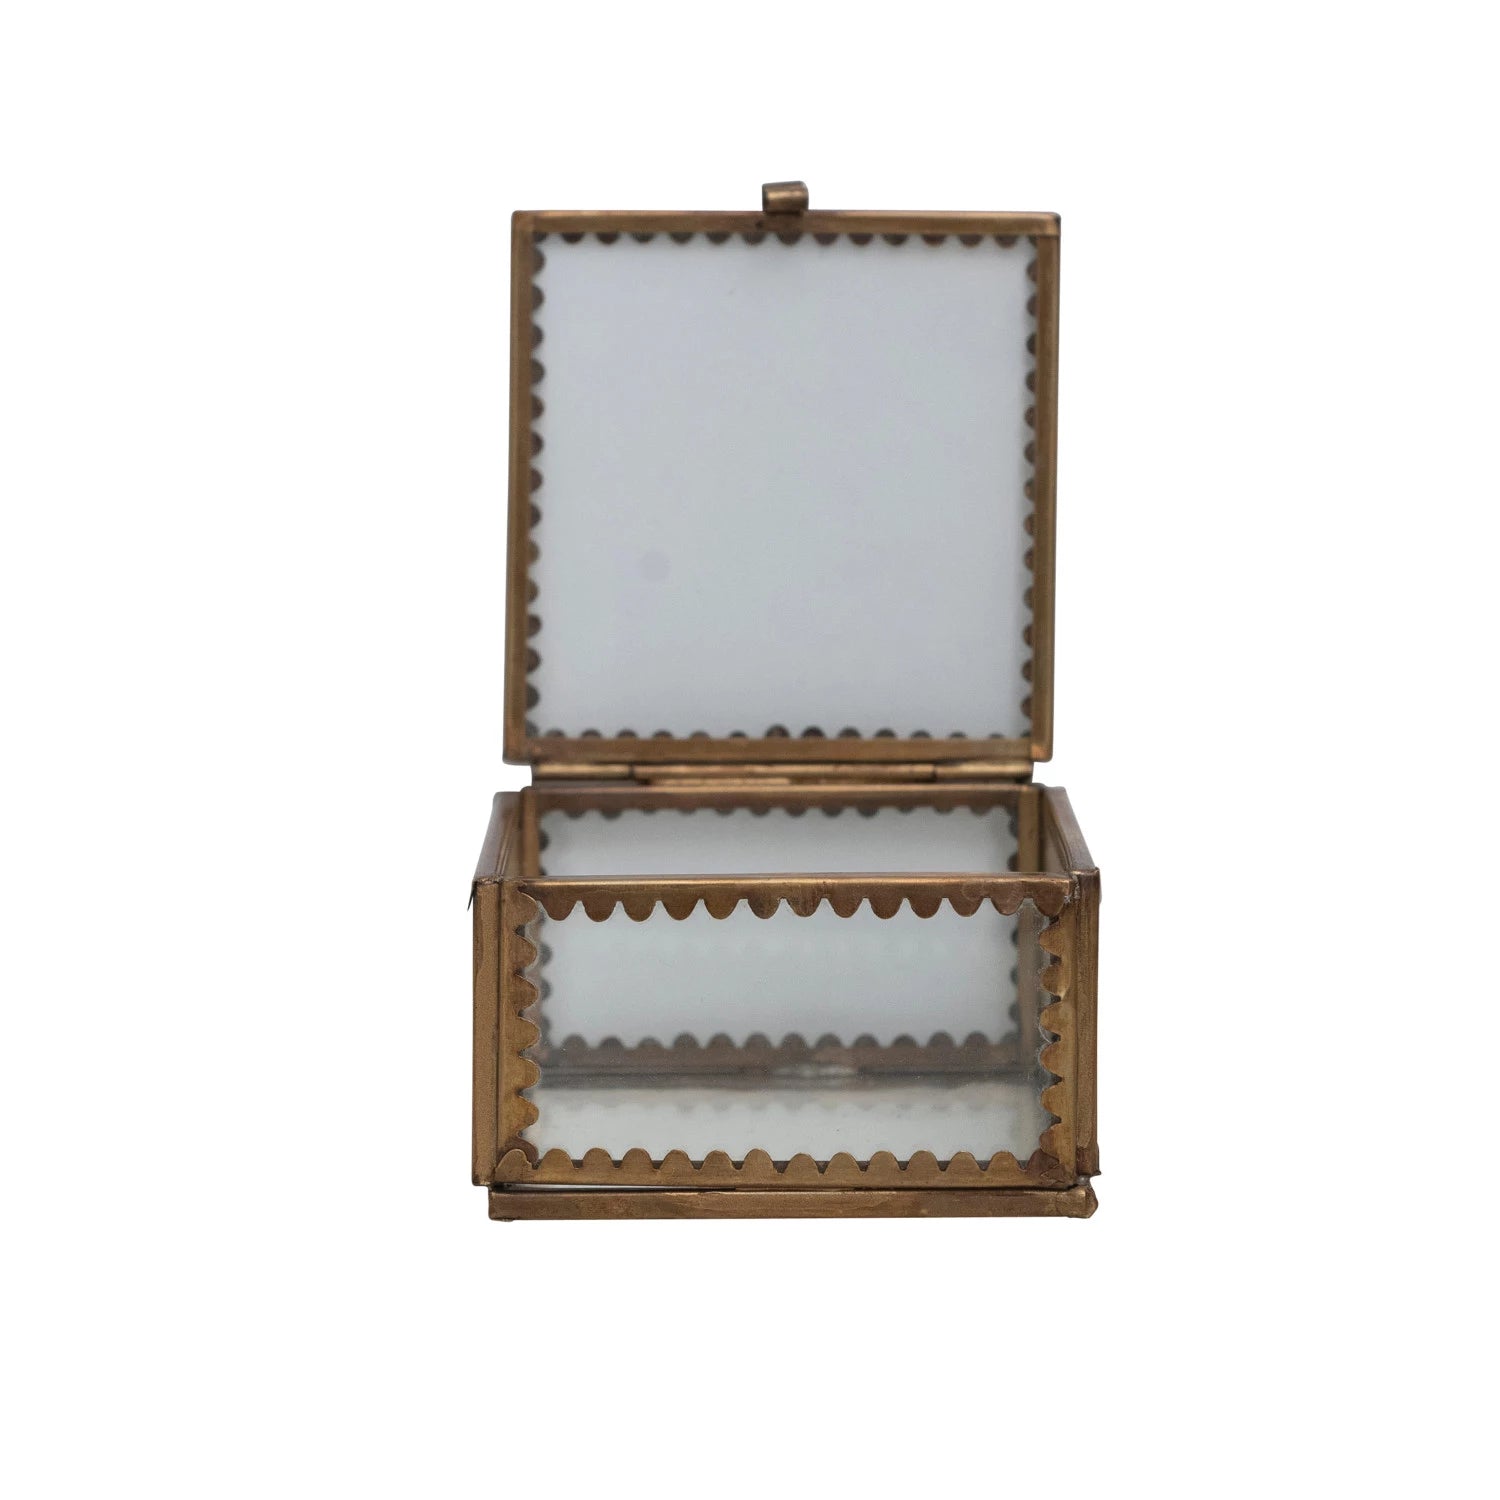 Open view of the brass and glass display box with scalloped edges.